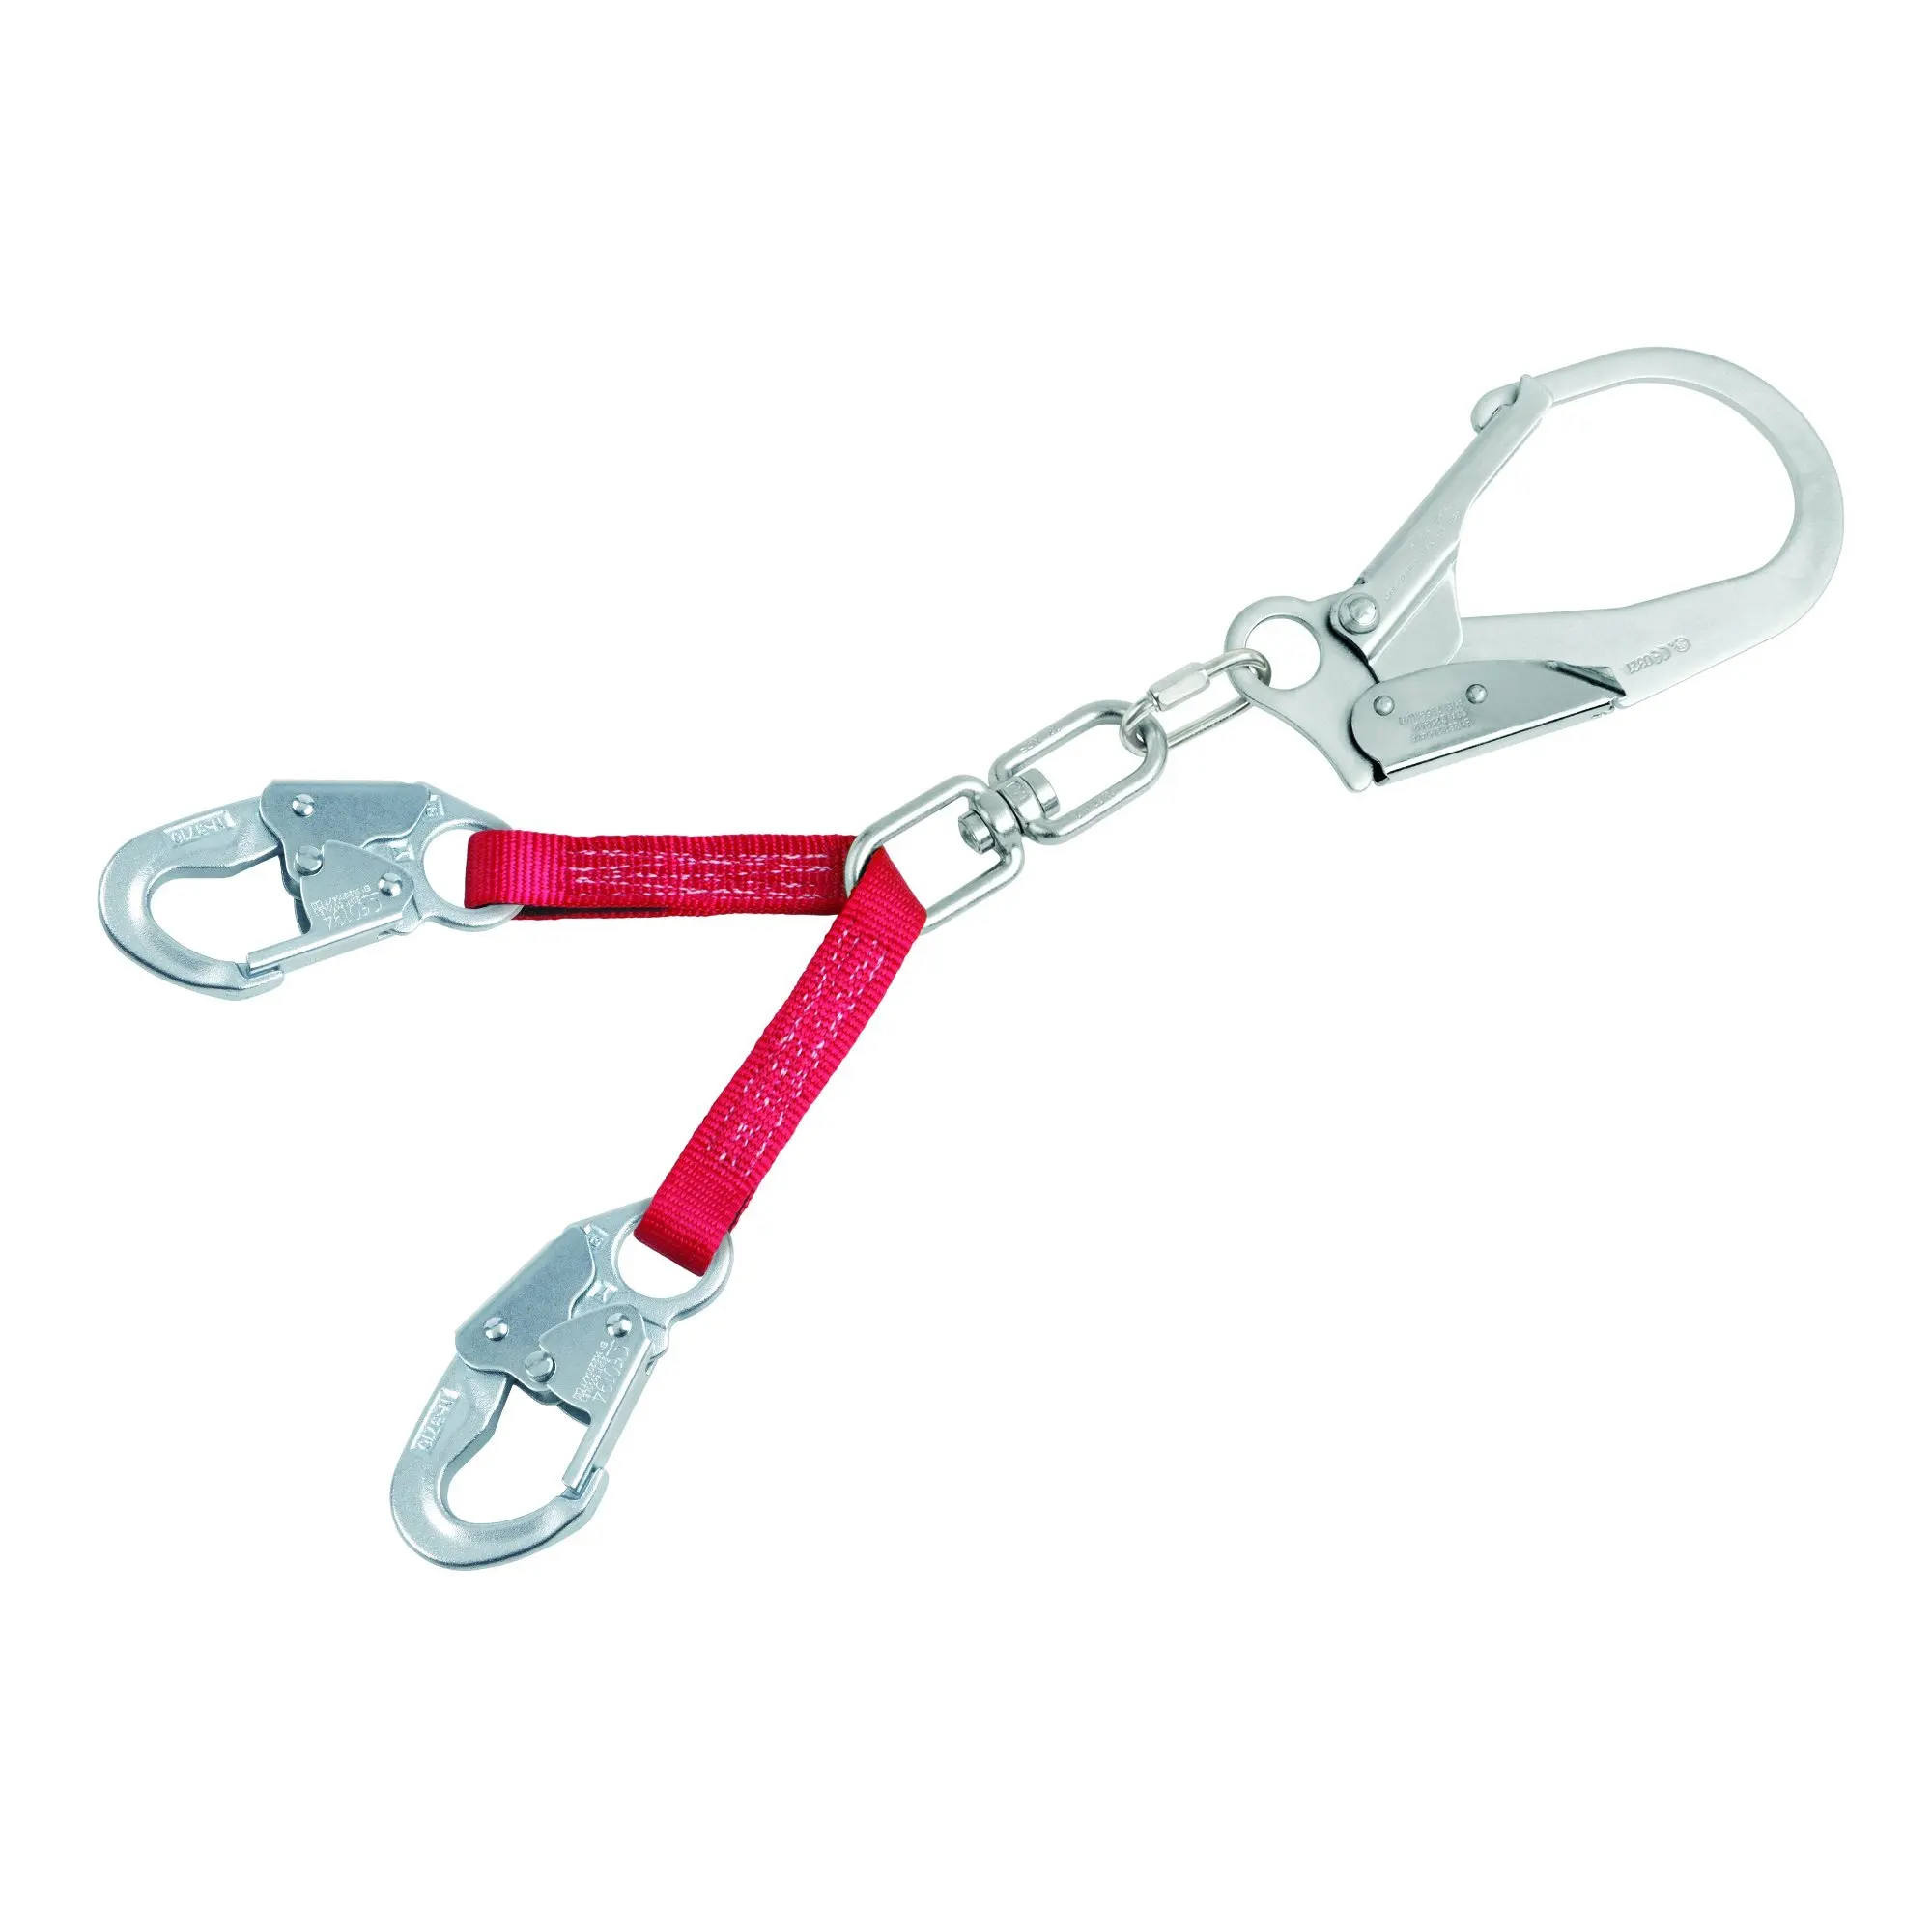 MSA Rebar Web Assembly With 18 Legs 2 36CL Rebar Steel Snap Hook And 36C Steel Snap Hooks